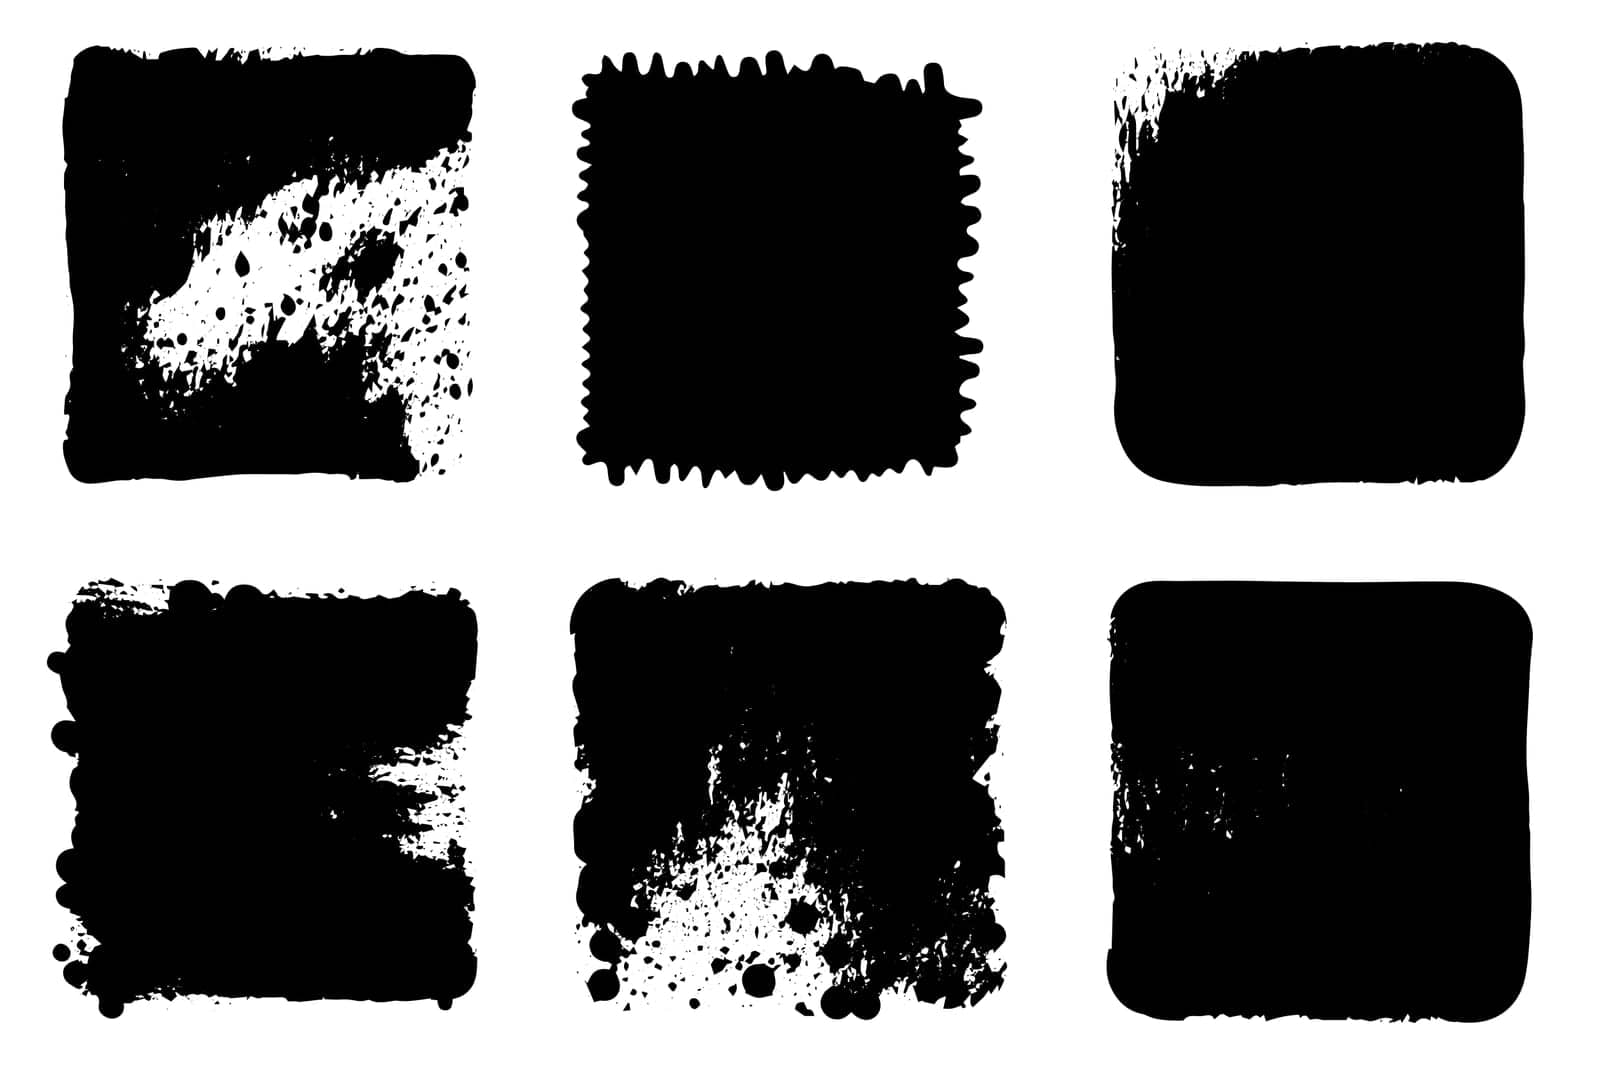 Grunge style set of black stamp box square shapes. Vector texture illustration. Retro template backgrounds collection